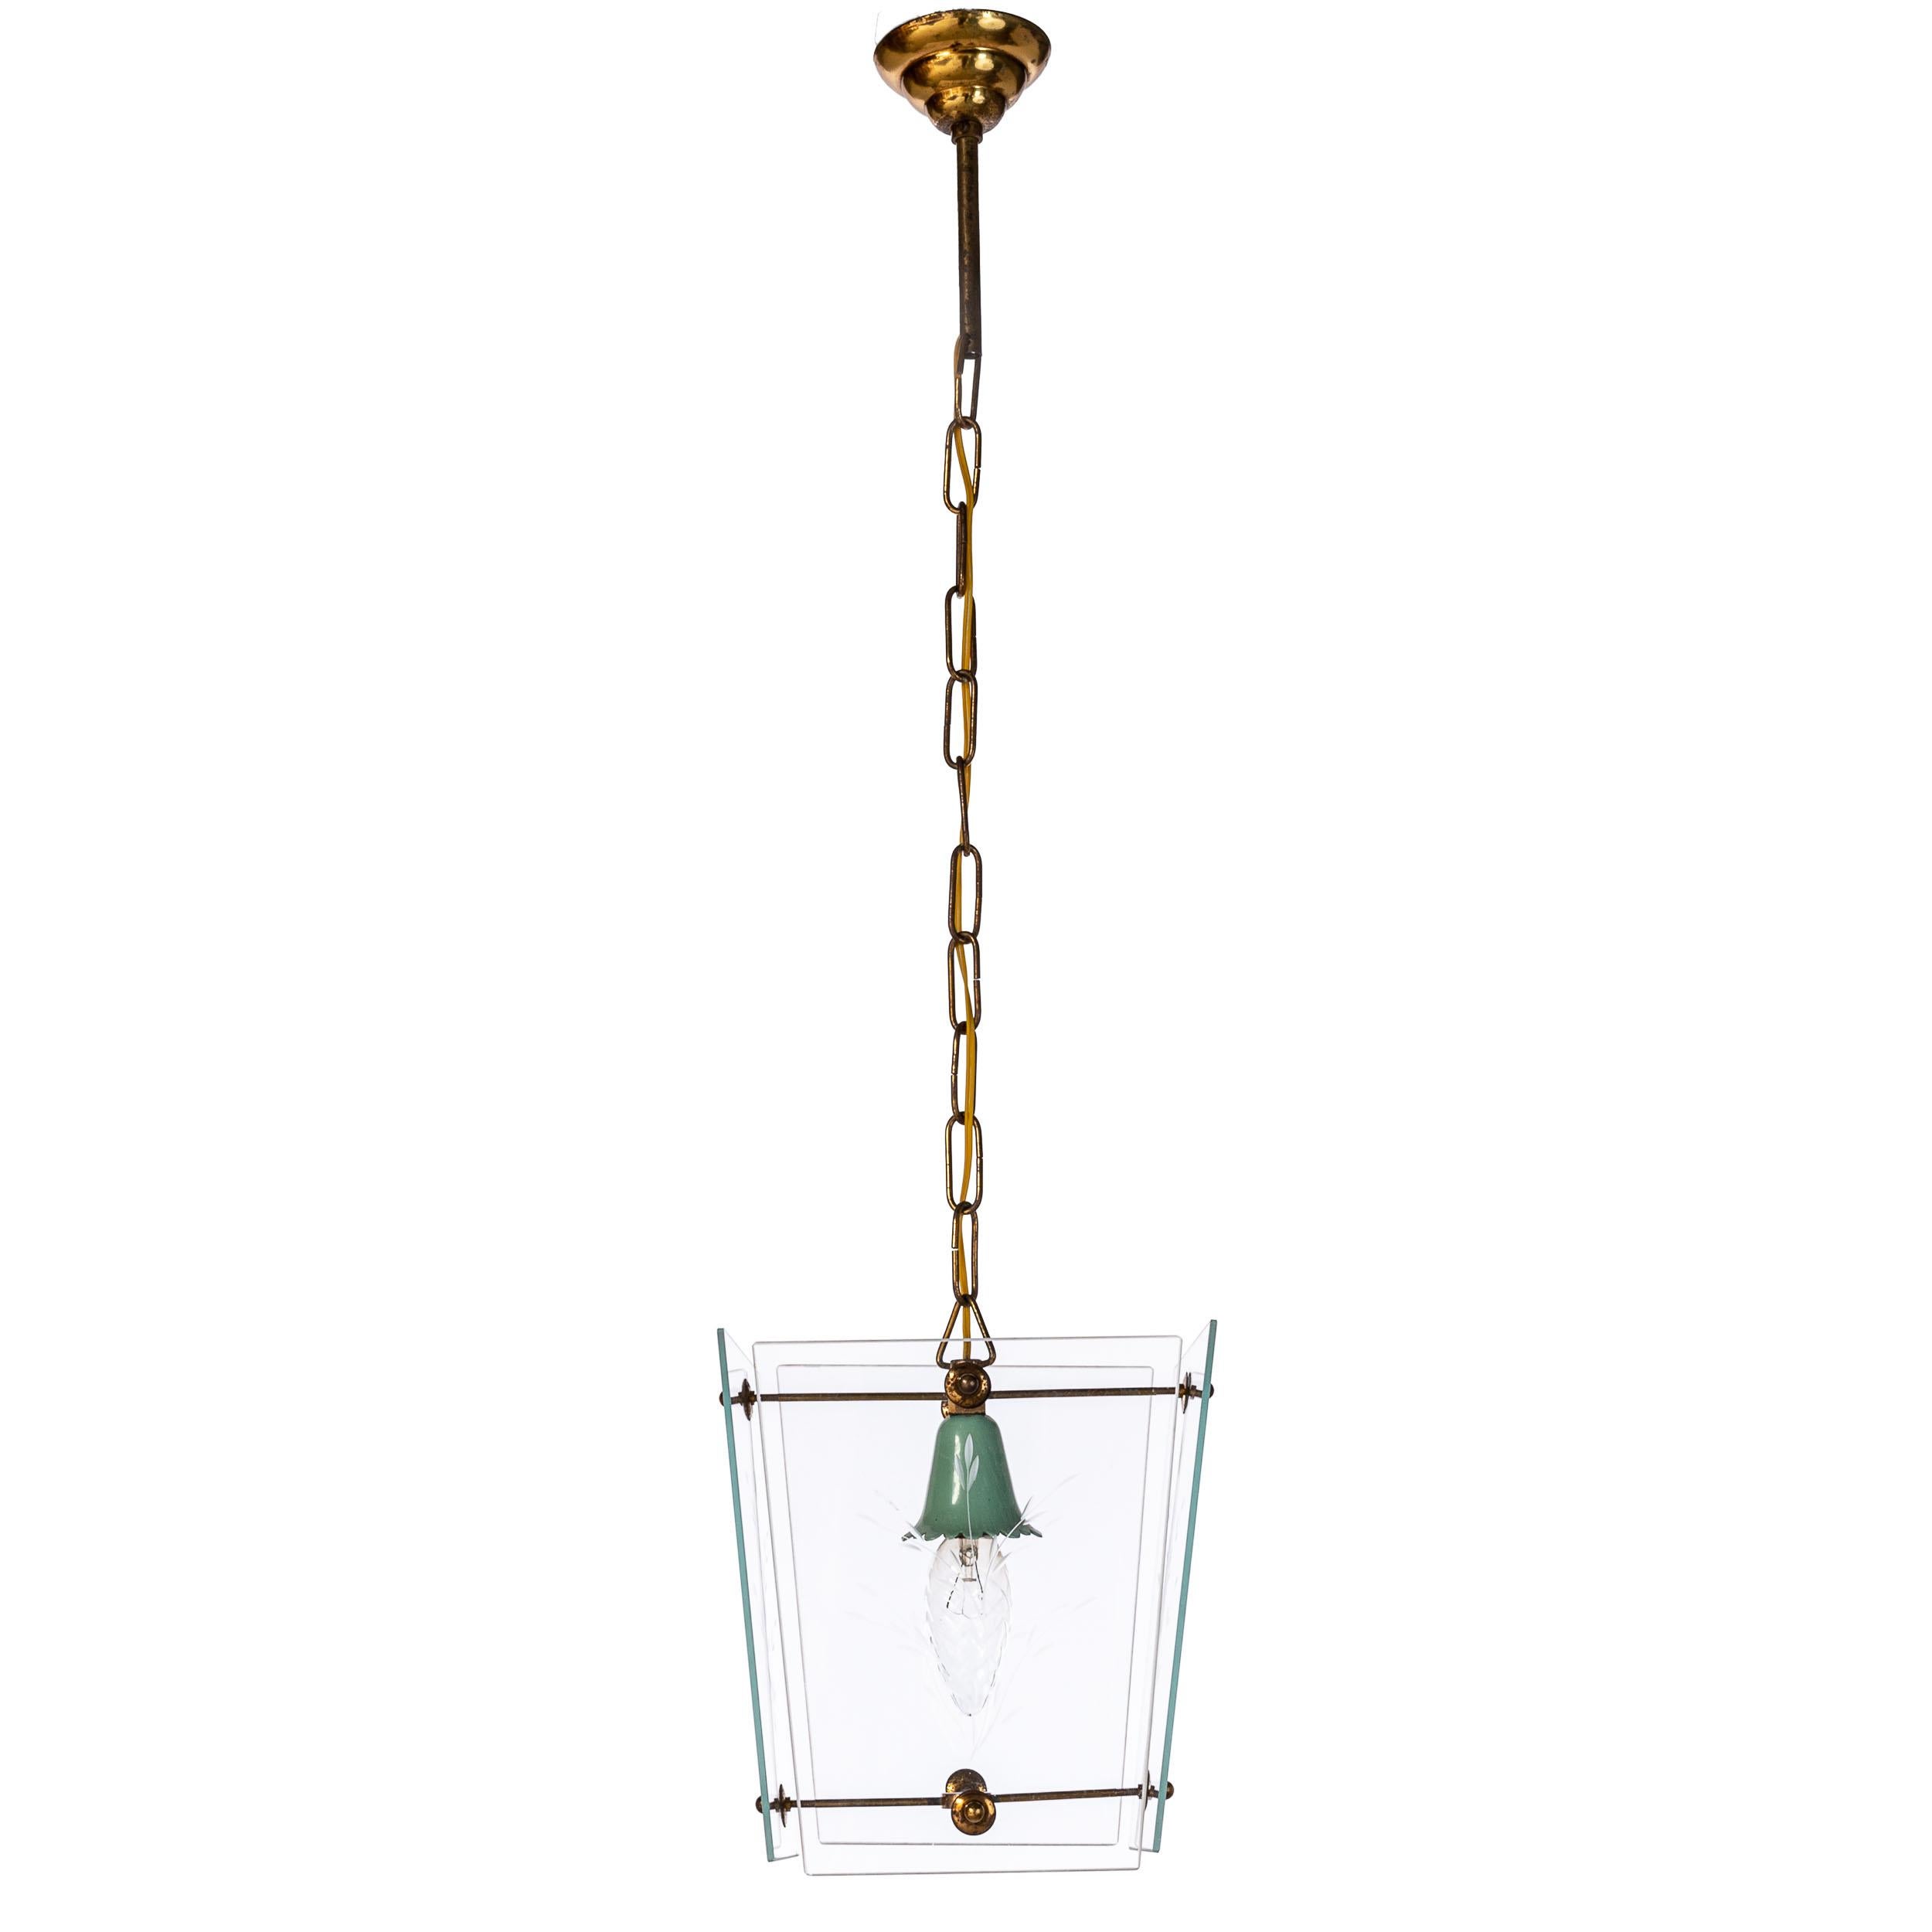 Delicate 1950s lantern. Consists of four etched glass panels, a brass frame and one E14 lightbulb.